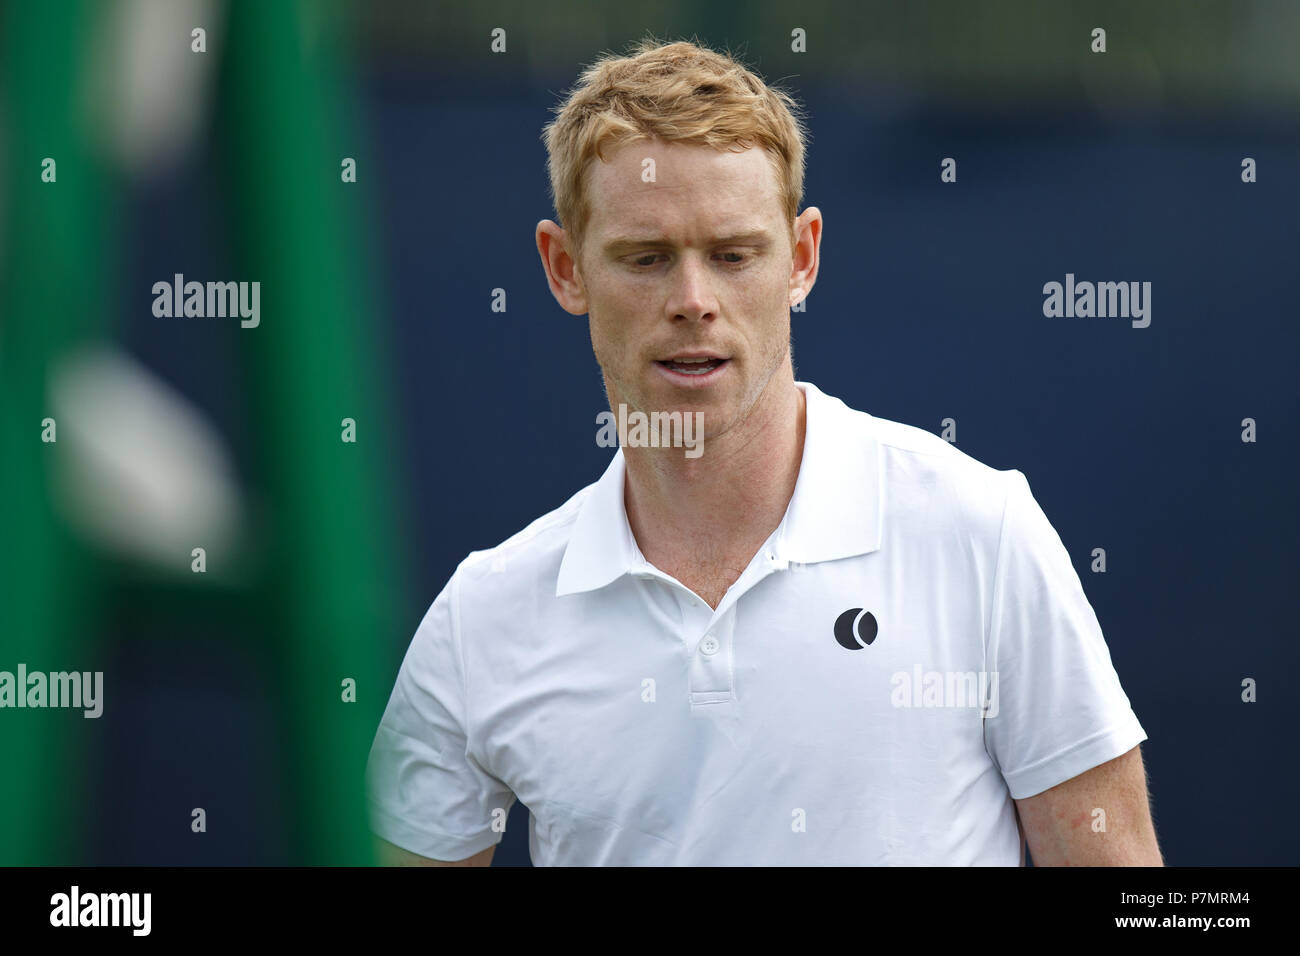 Edward Corrie, professional tennis player from the United Kingdom, during a match. Stock Photo